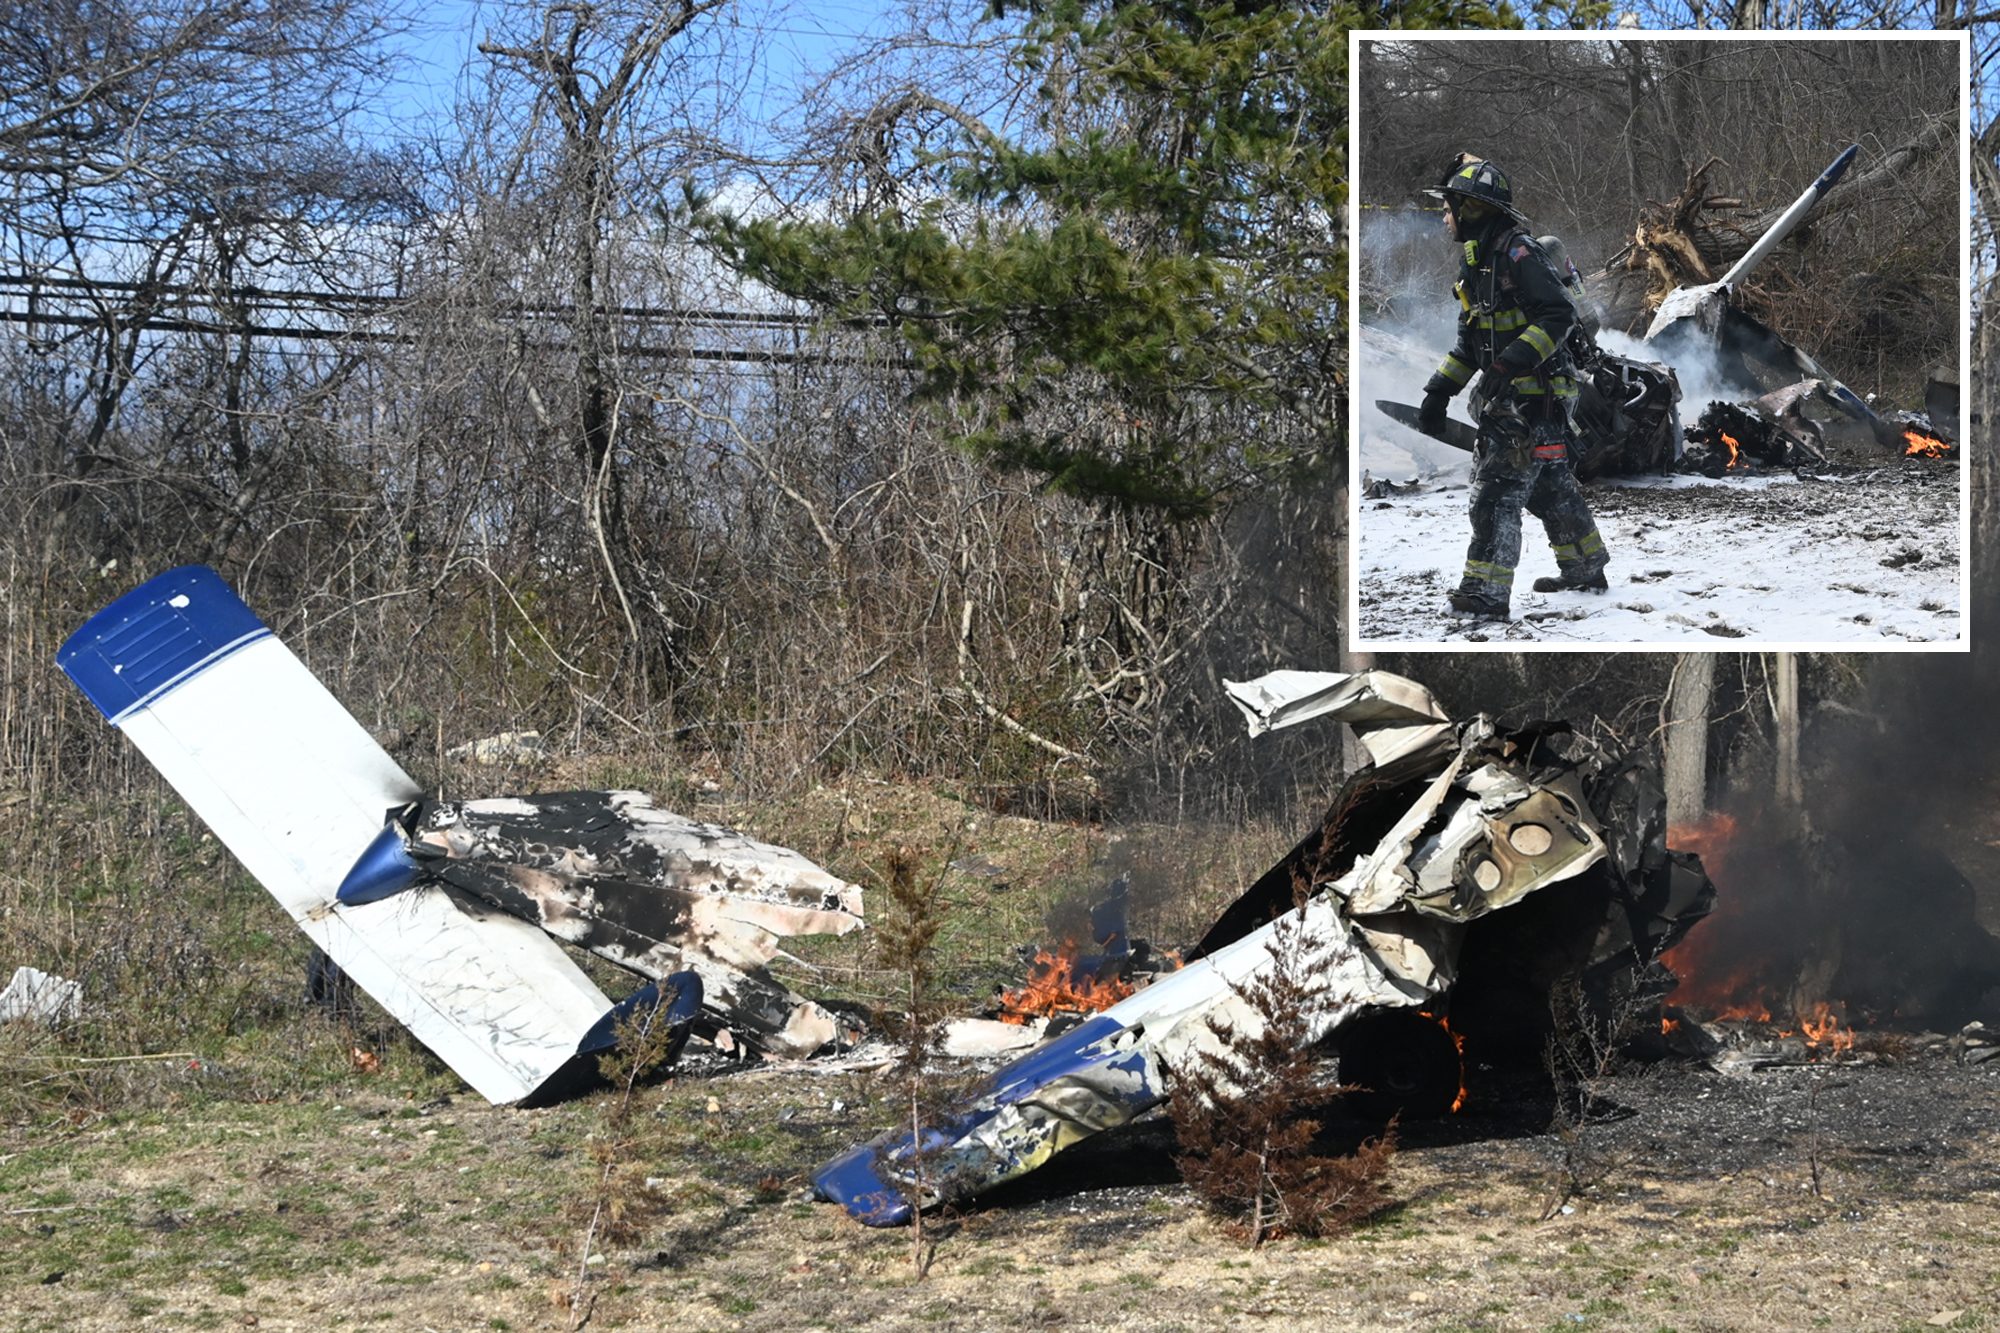 1 dead, 2 injured after small plane crashes in neighborhood on Long Island